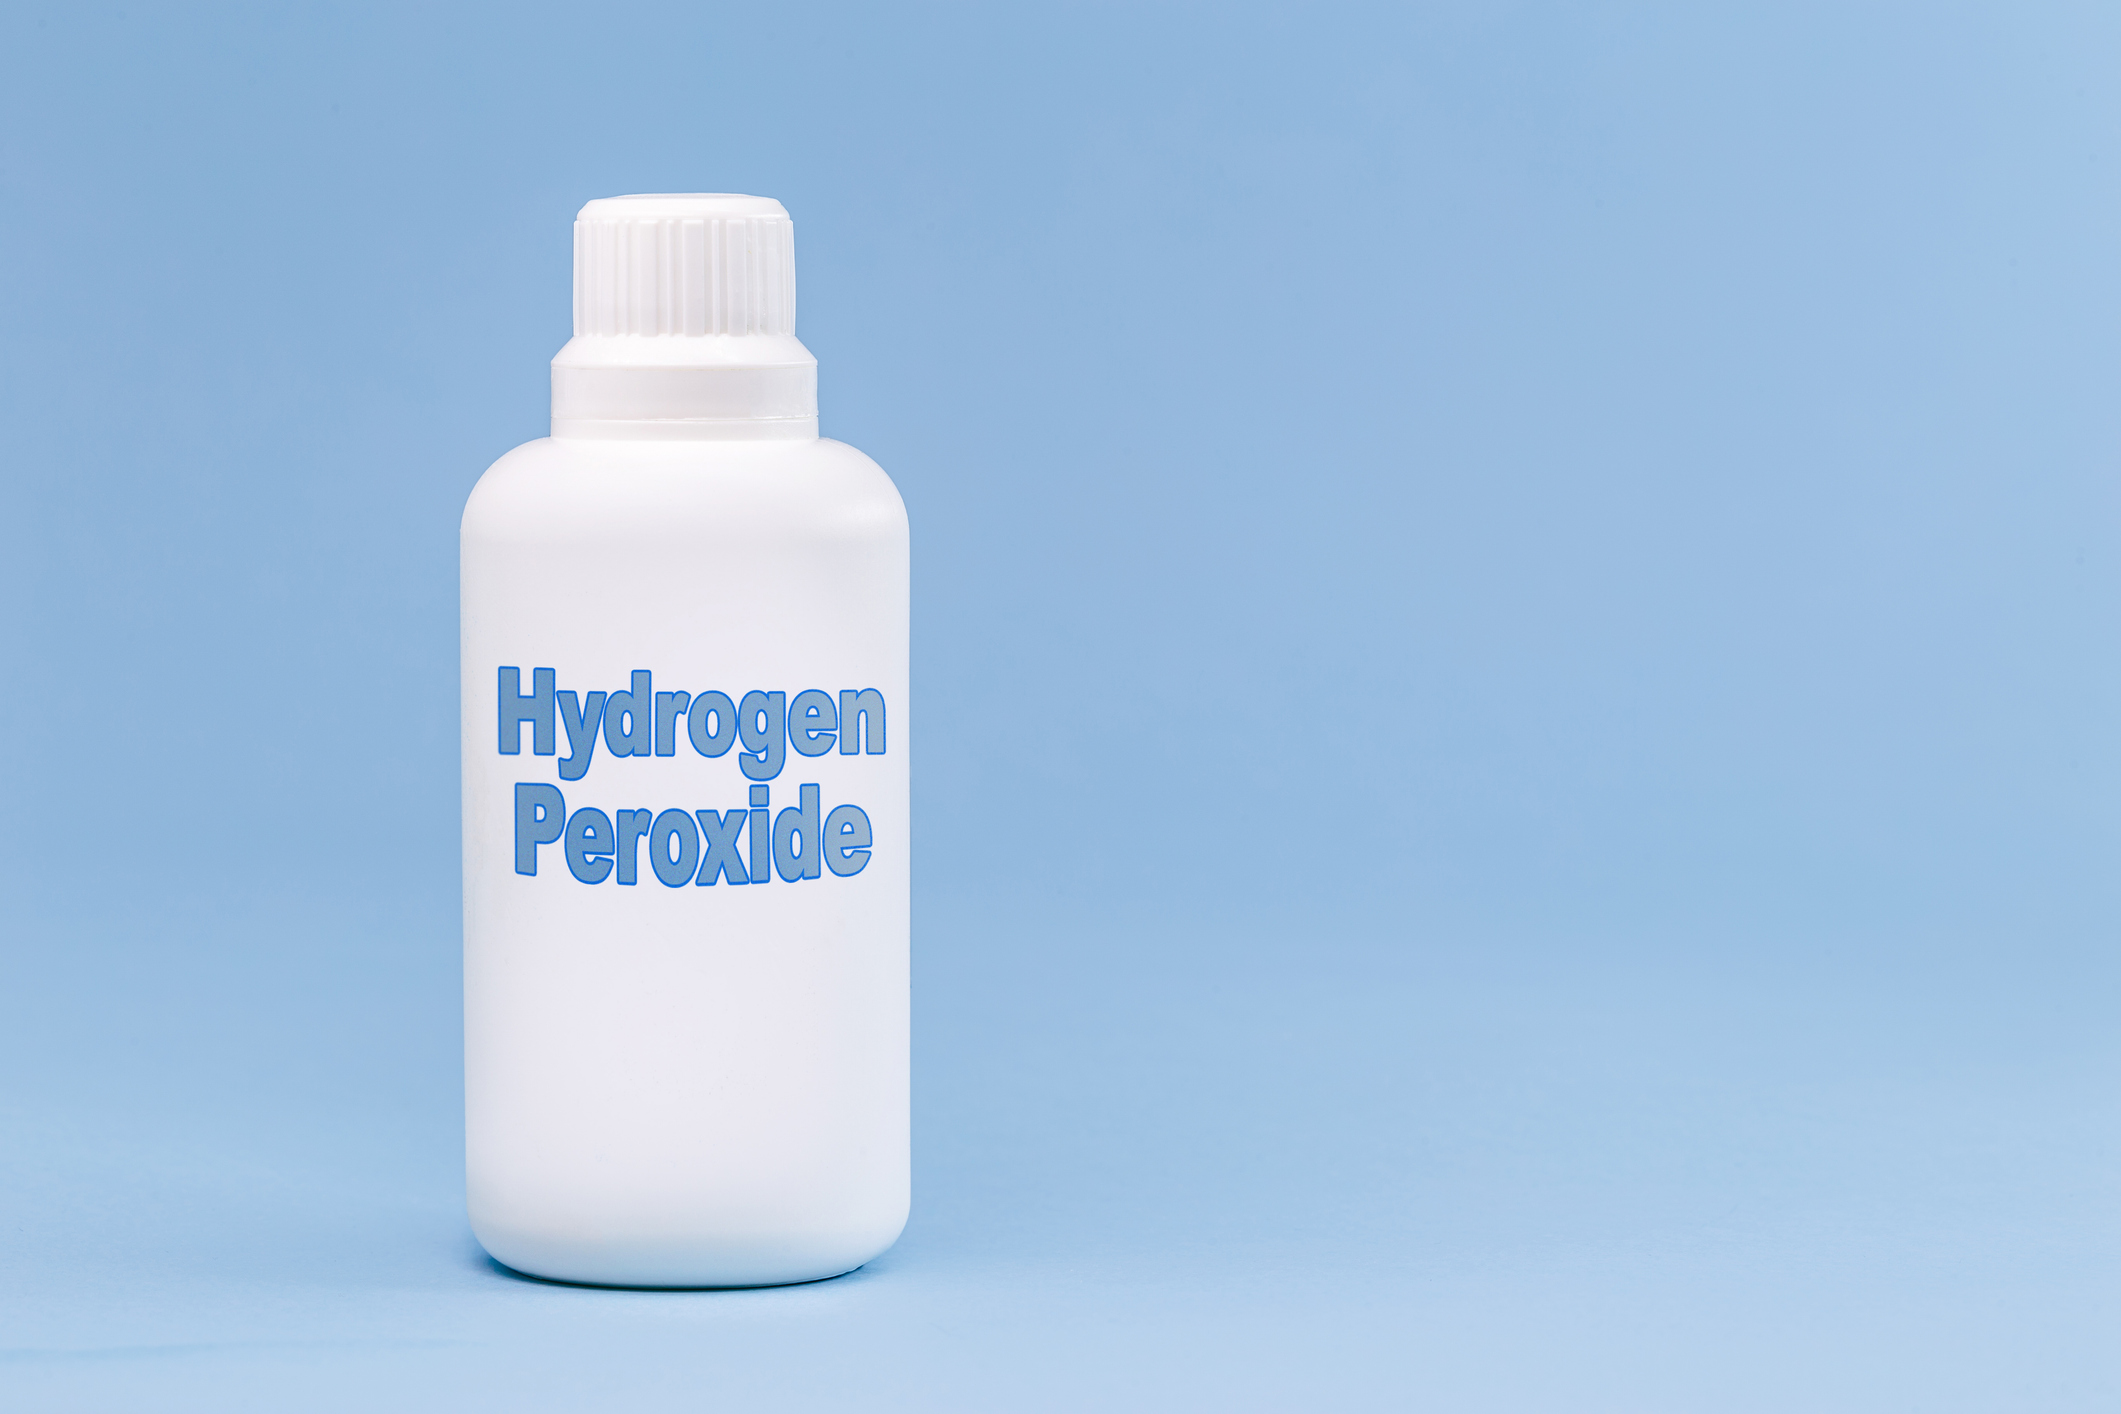 15 Surprising uses for hydrogen peroxide [infographic]